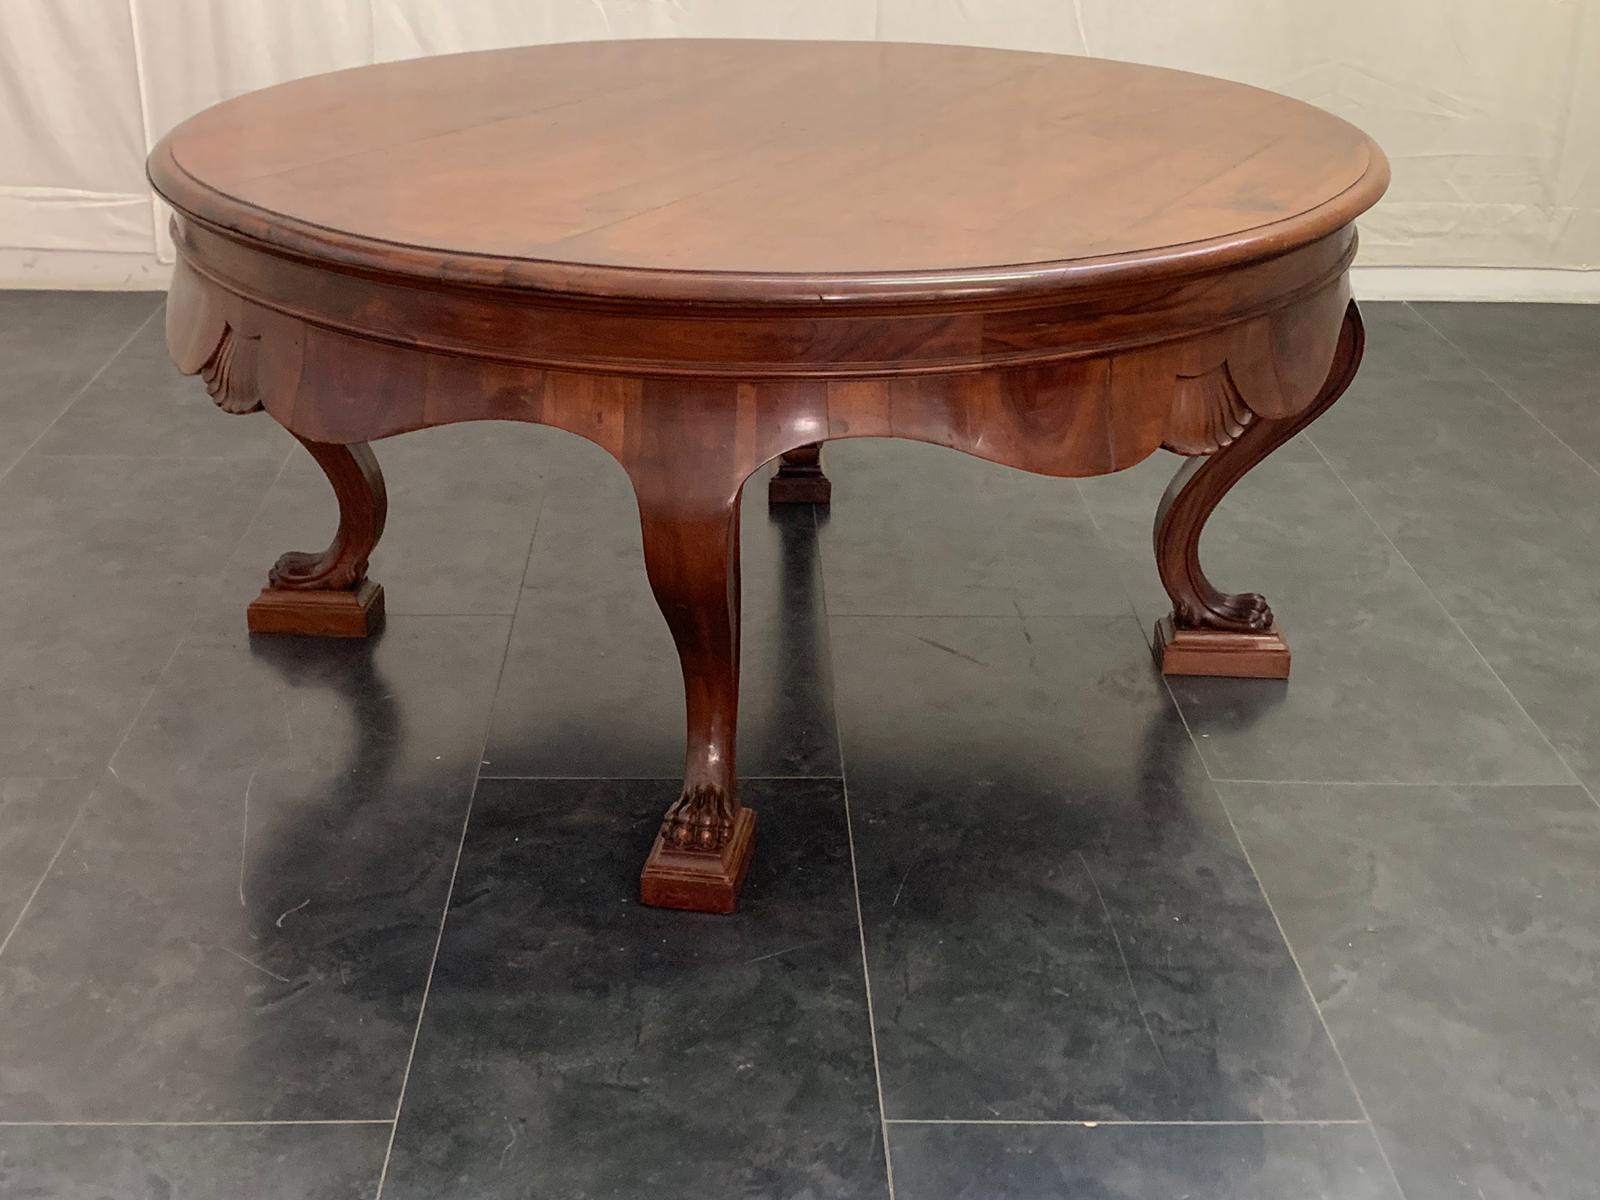 Beautiful round table, late 18th century and very early 19th century, solid walnut wood, excellent cabinet-making.
Packaging with bubble wrap and cardboard boxes is included. If the wooden packaging is needed (fumigated crates or boxes) for US and